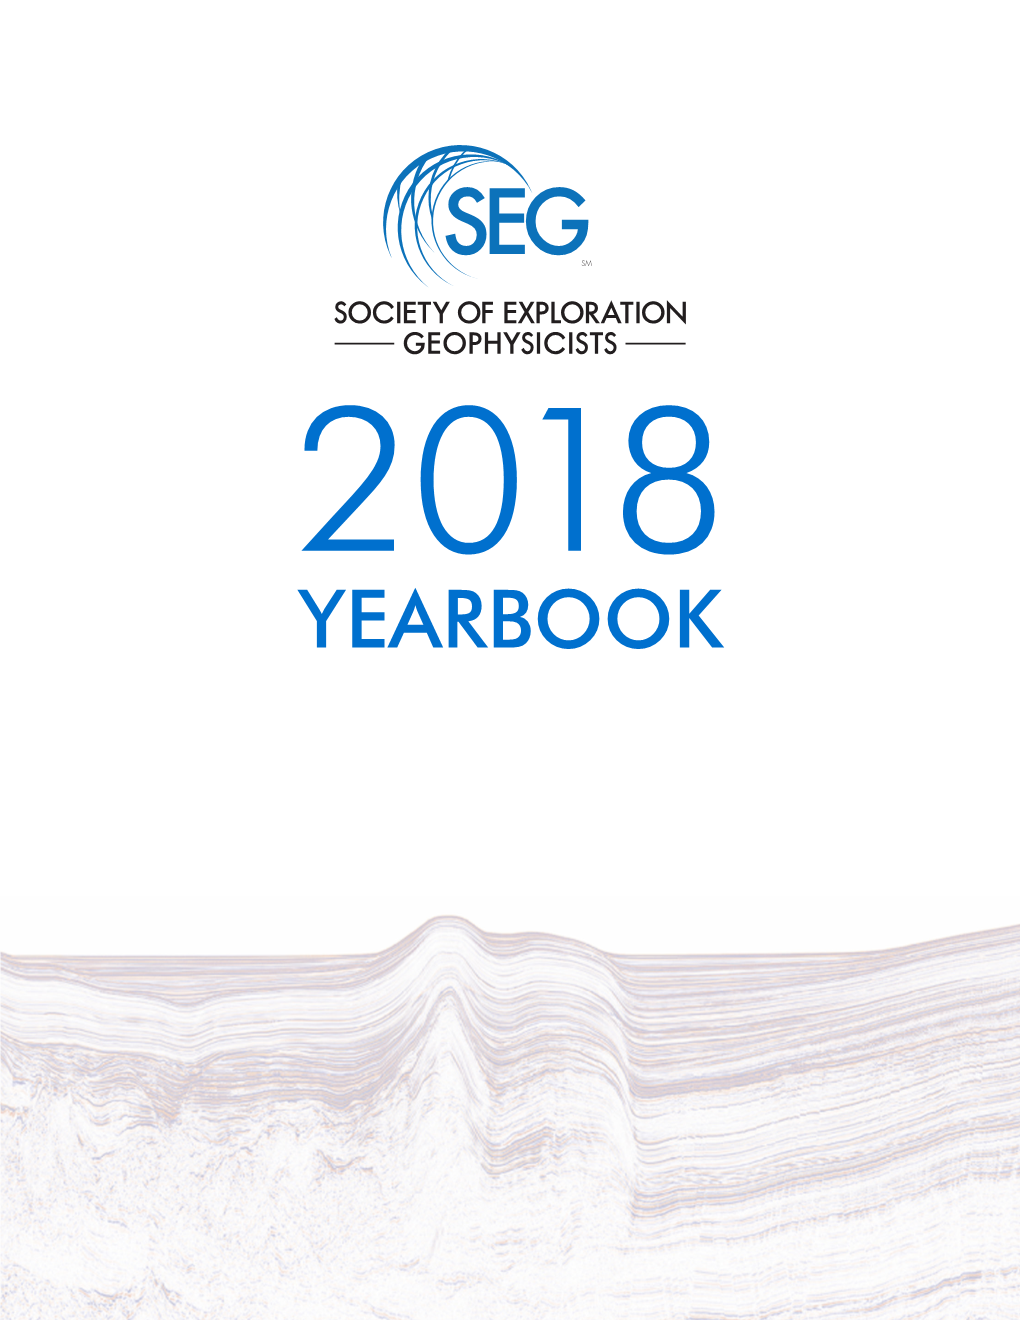 Yearbook Society of Exploration Geophysicists 2018 Yearbook